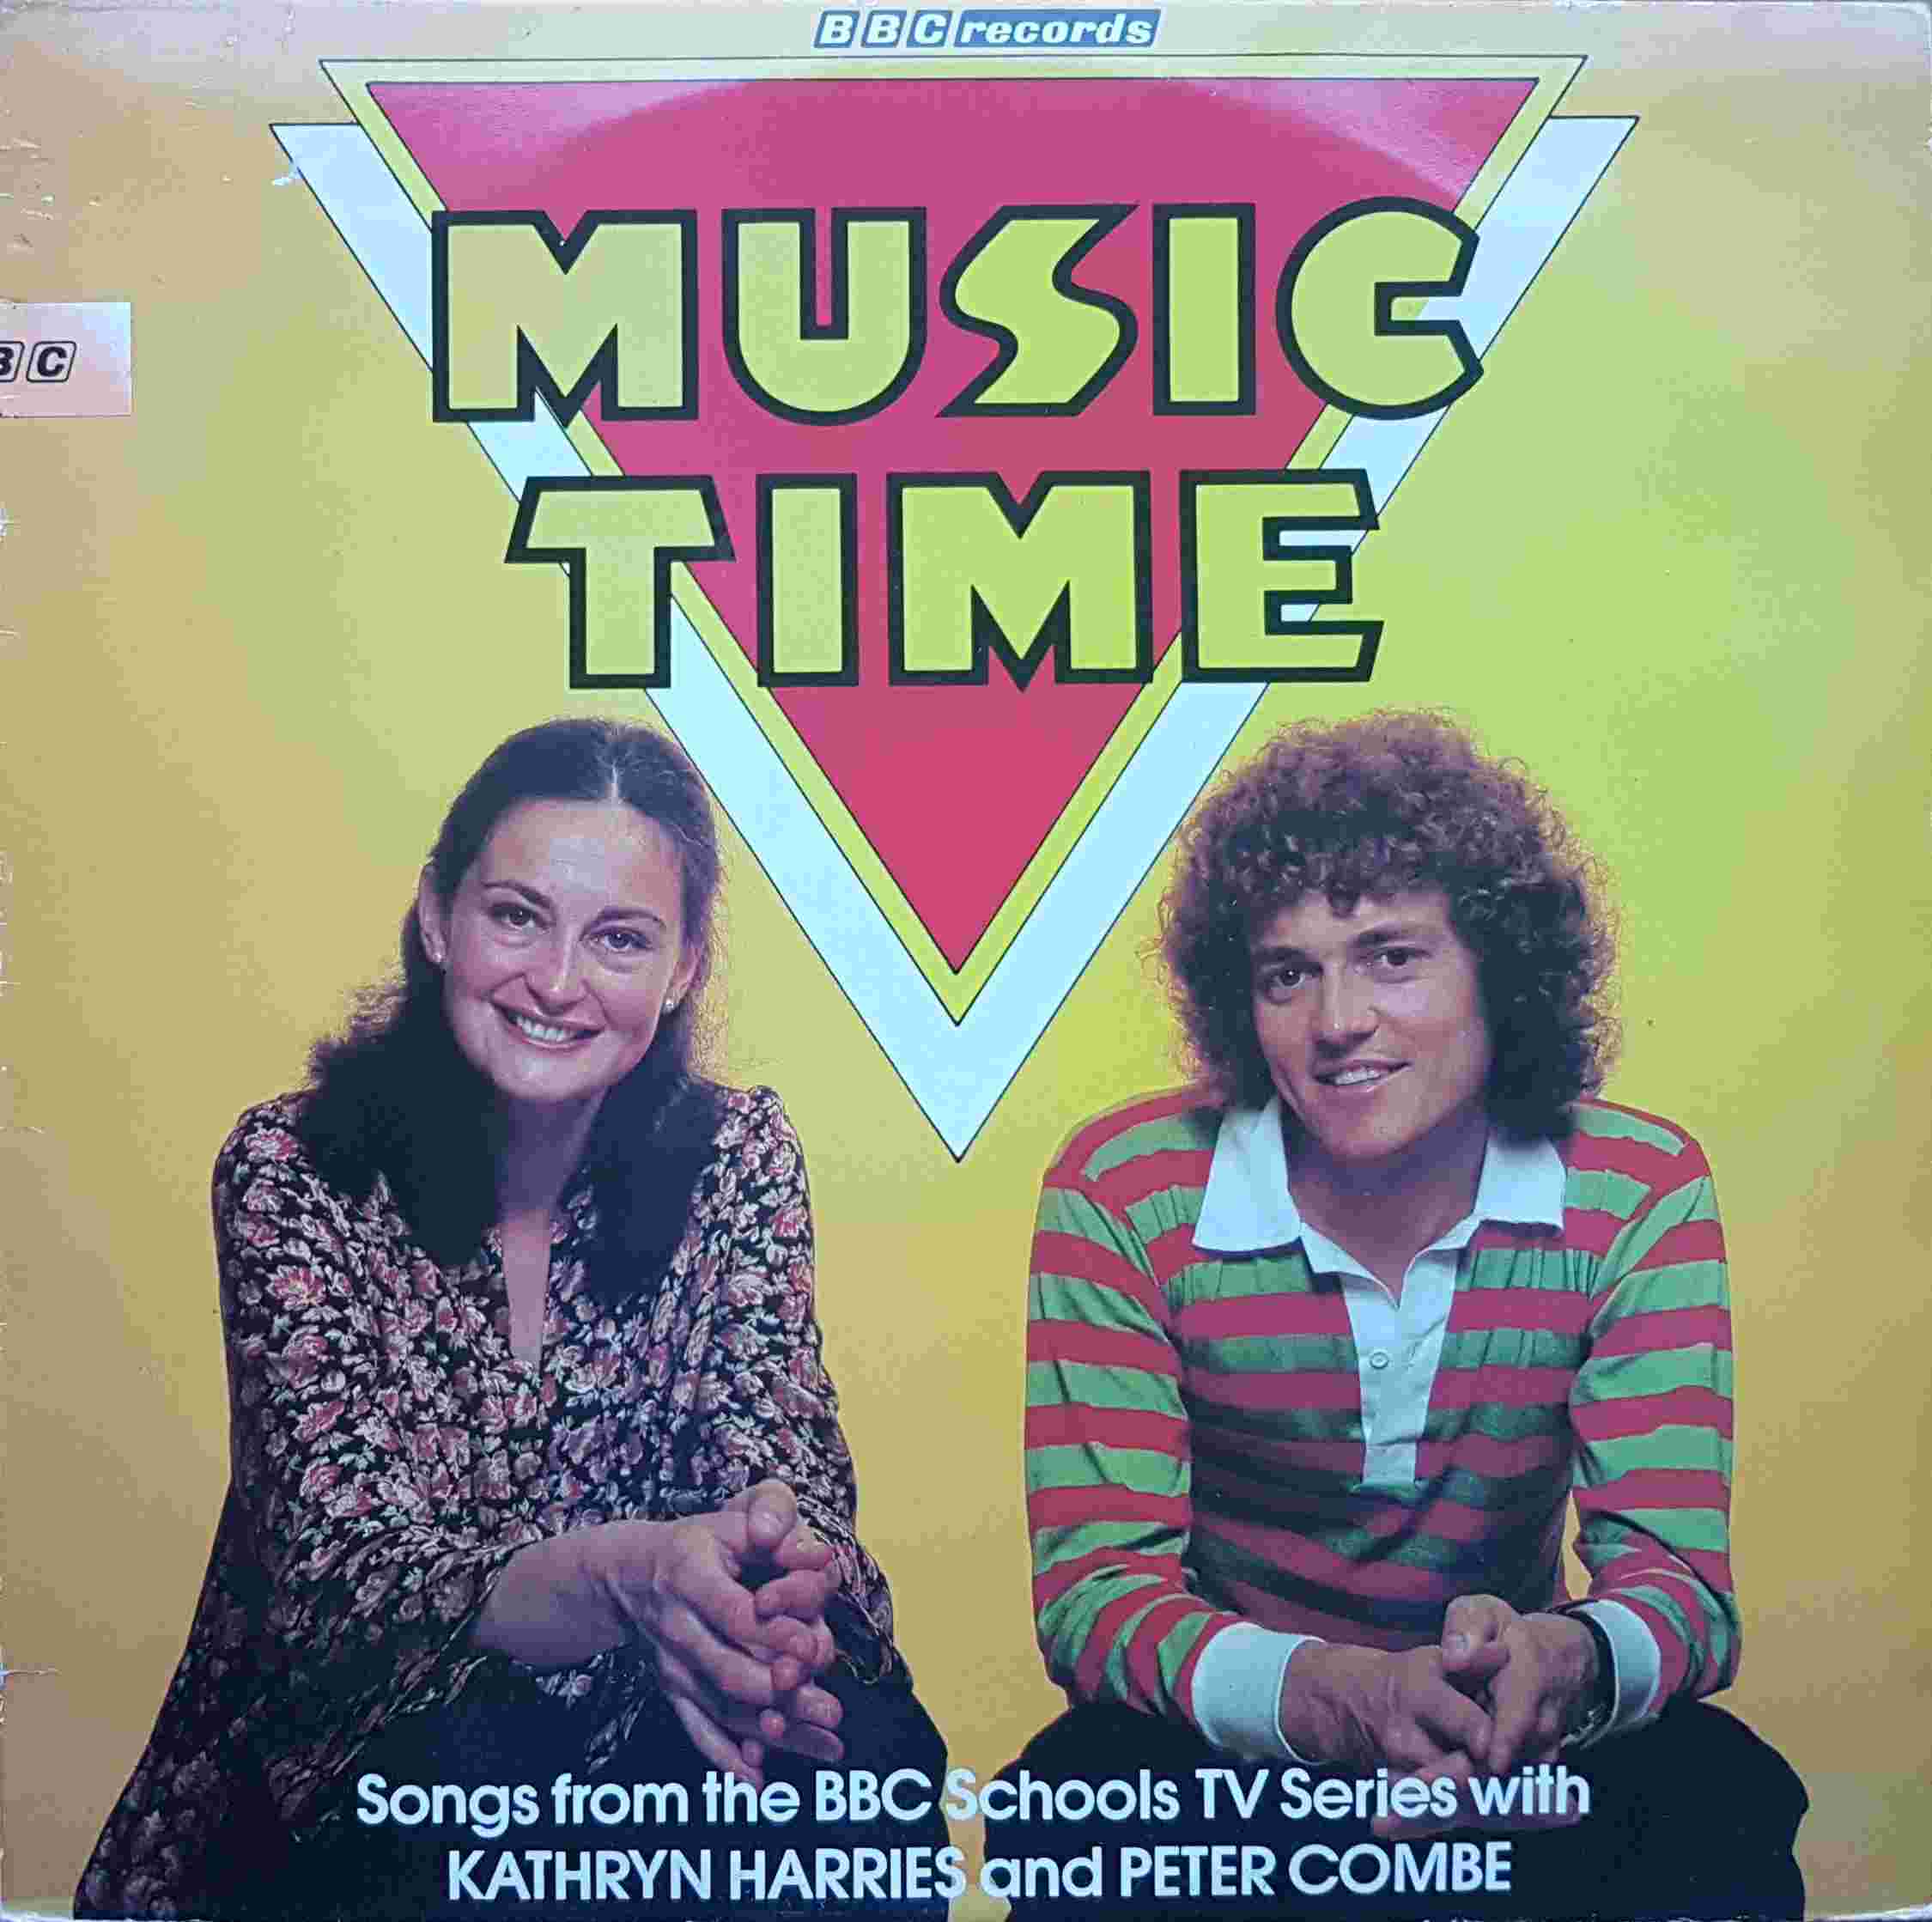 Picture of REC 362 Music time by artist Various / Kathryn Harries / Peter Combe from the BBC albums - Records and Tapes library